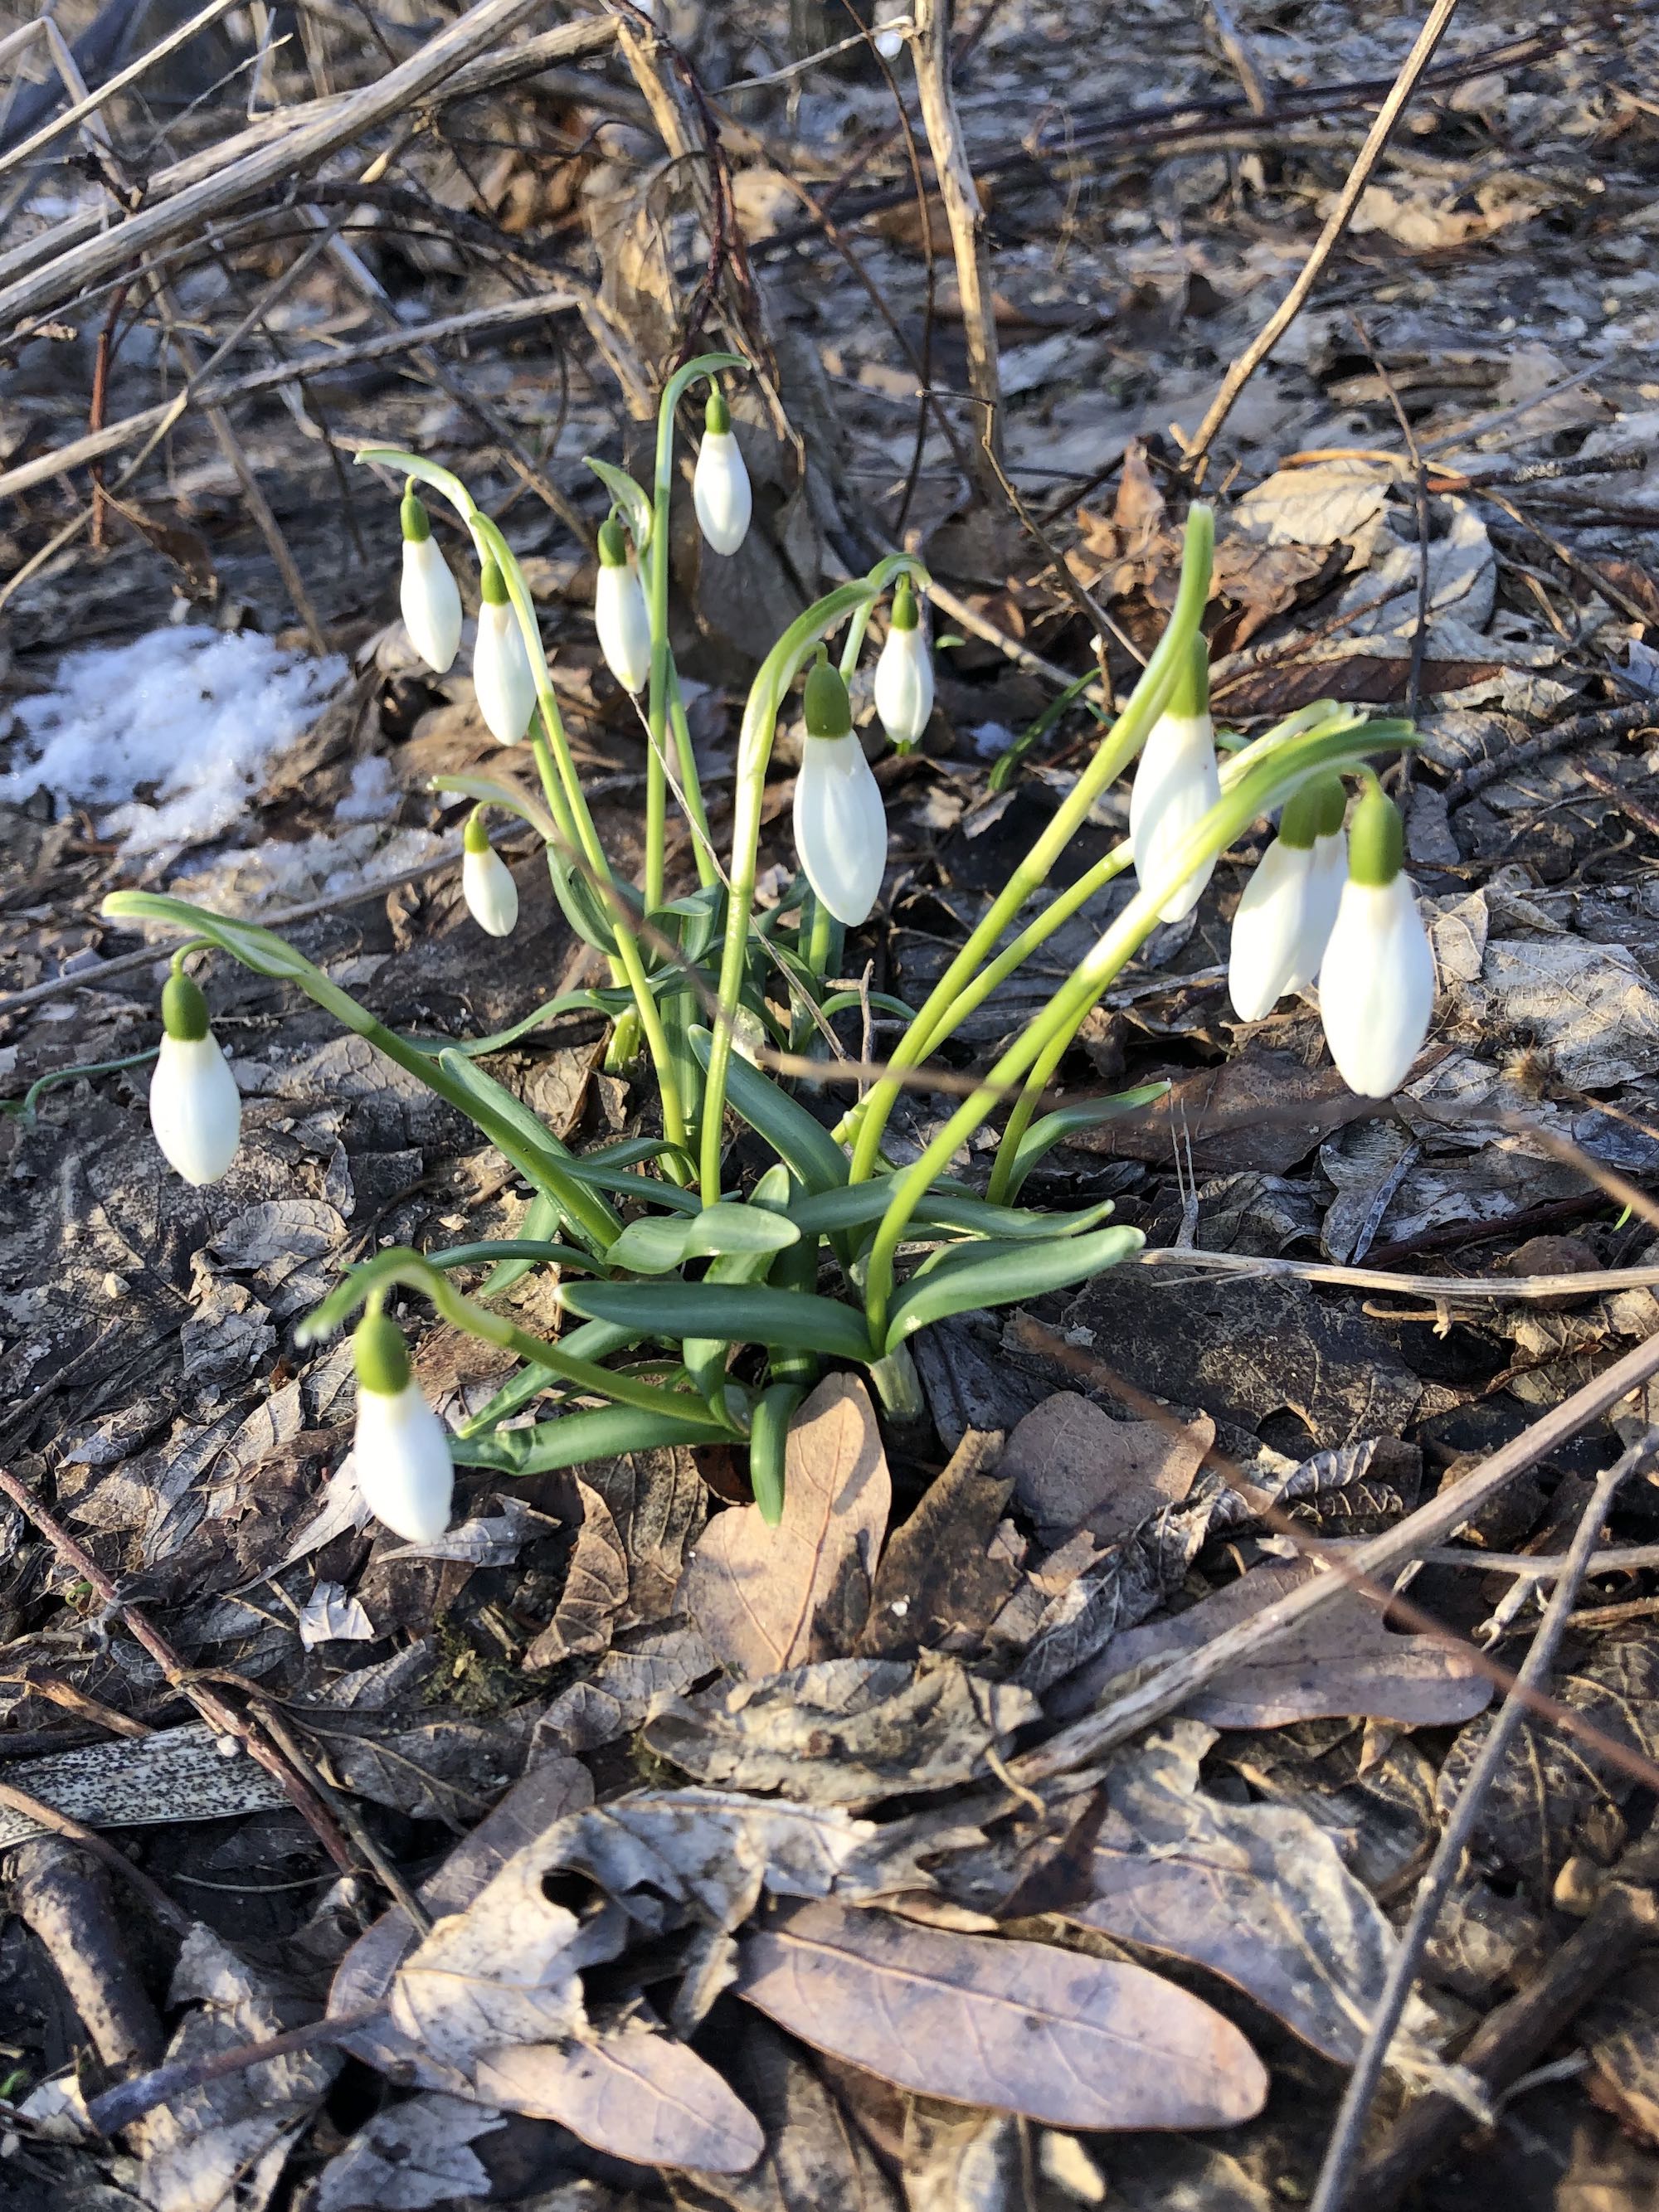 Snowdrops emerging in Madison Wisconsin along Arbor Drive on March 18, 2021.